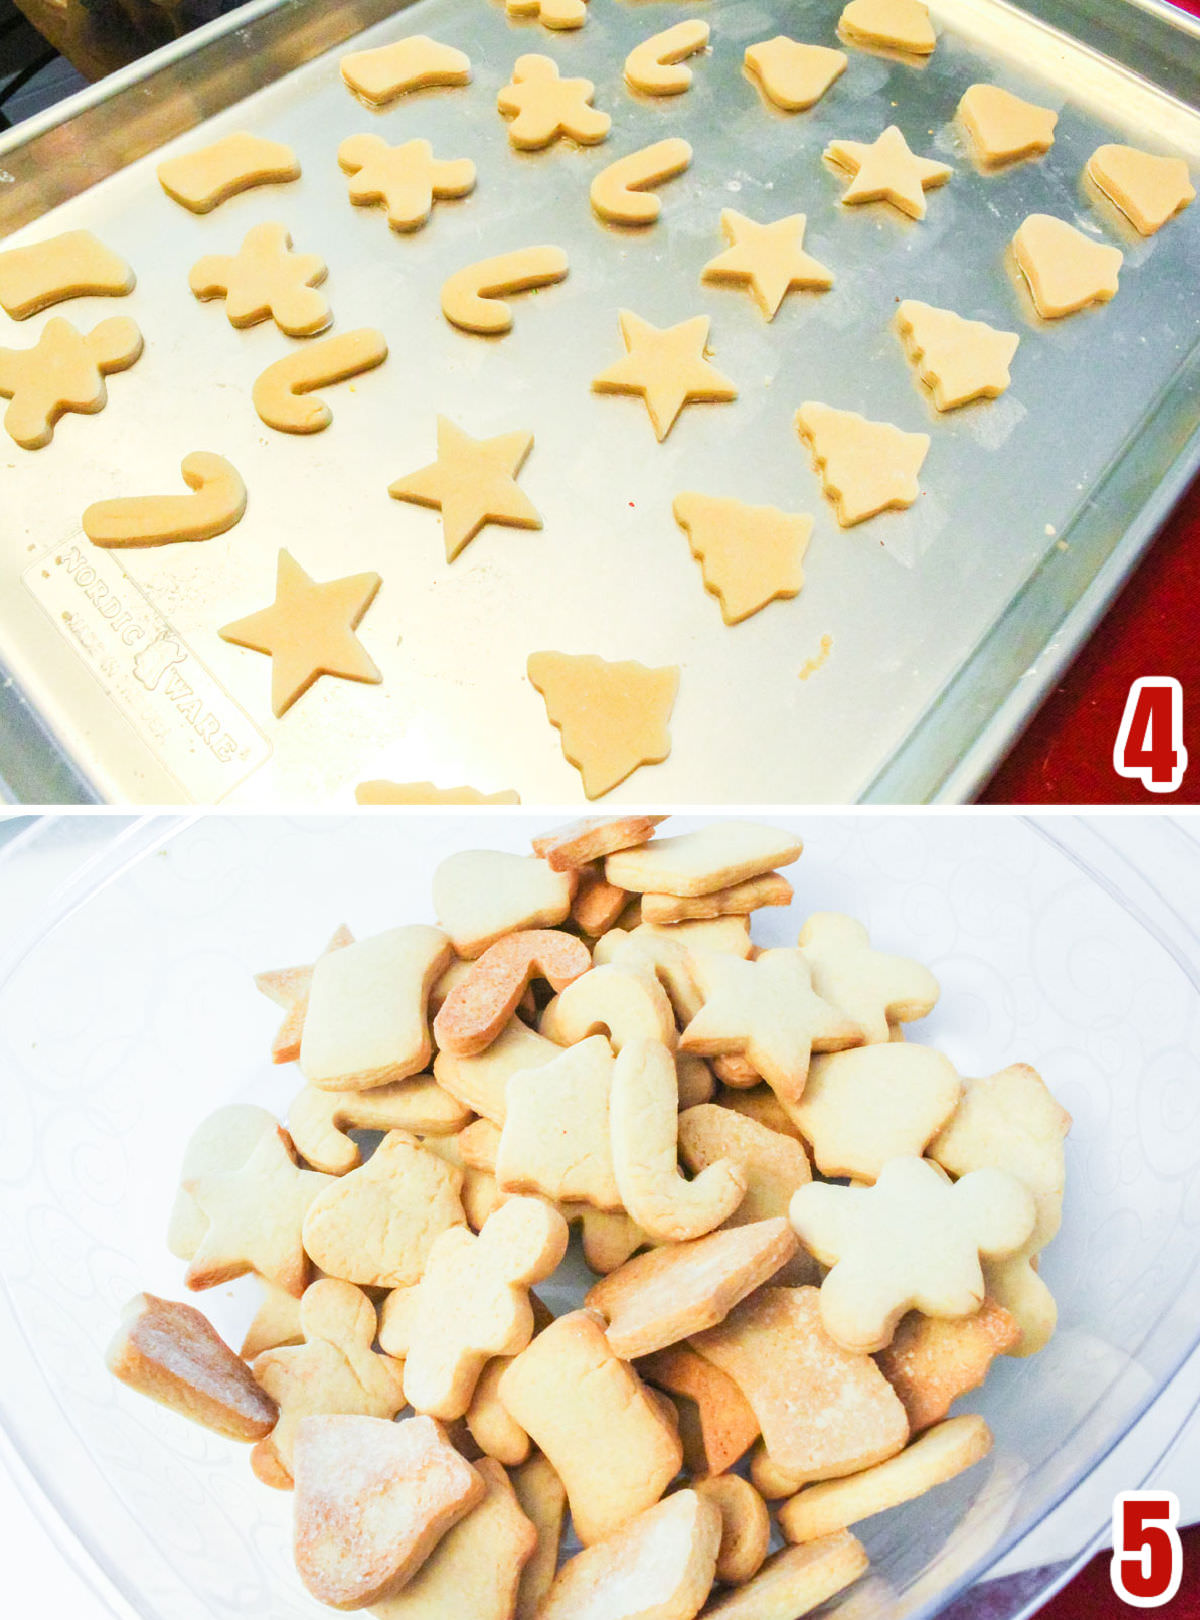 Collage image showing the steps for baking the small holiday-themed Sugar Cookies.